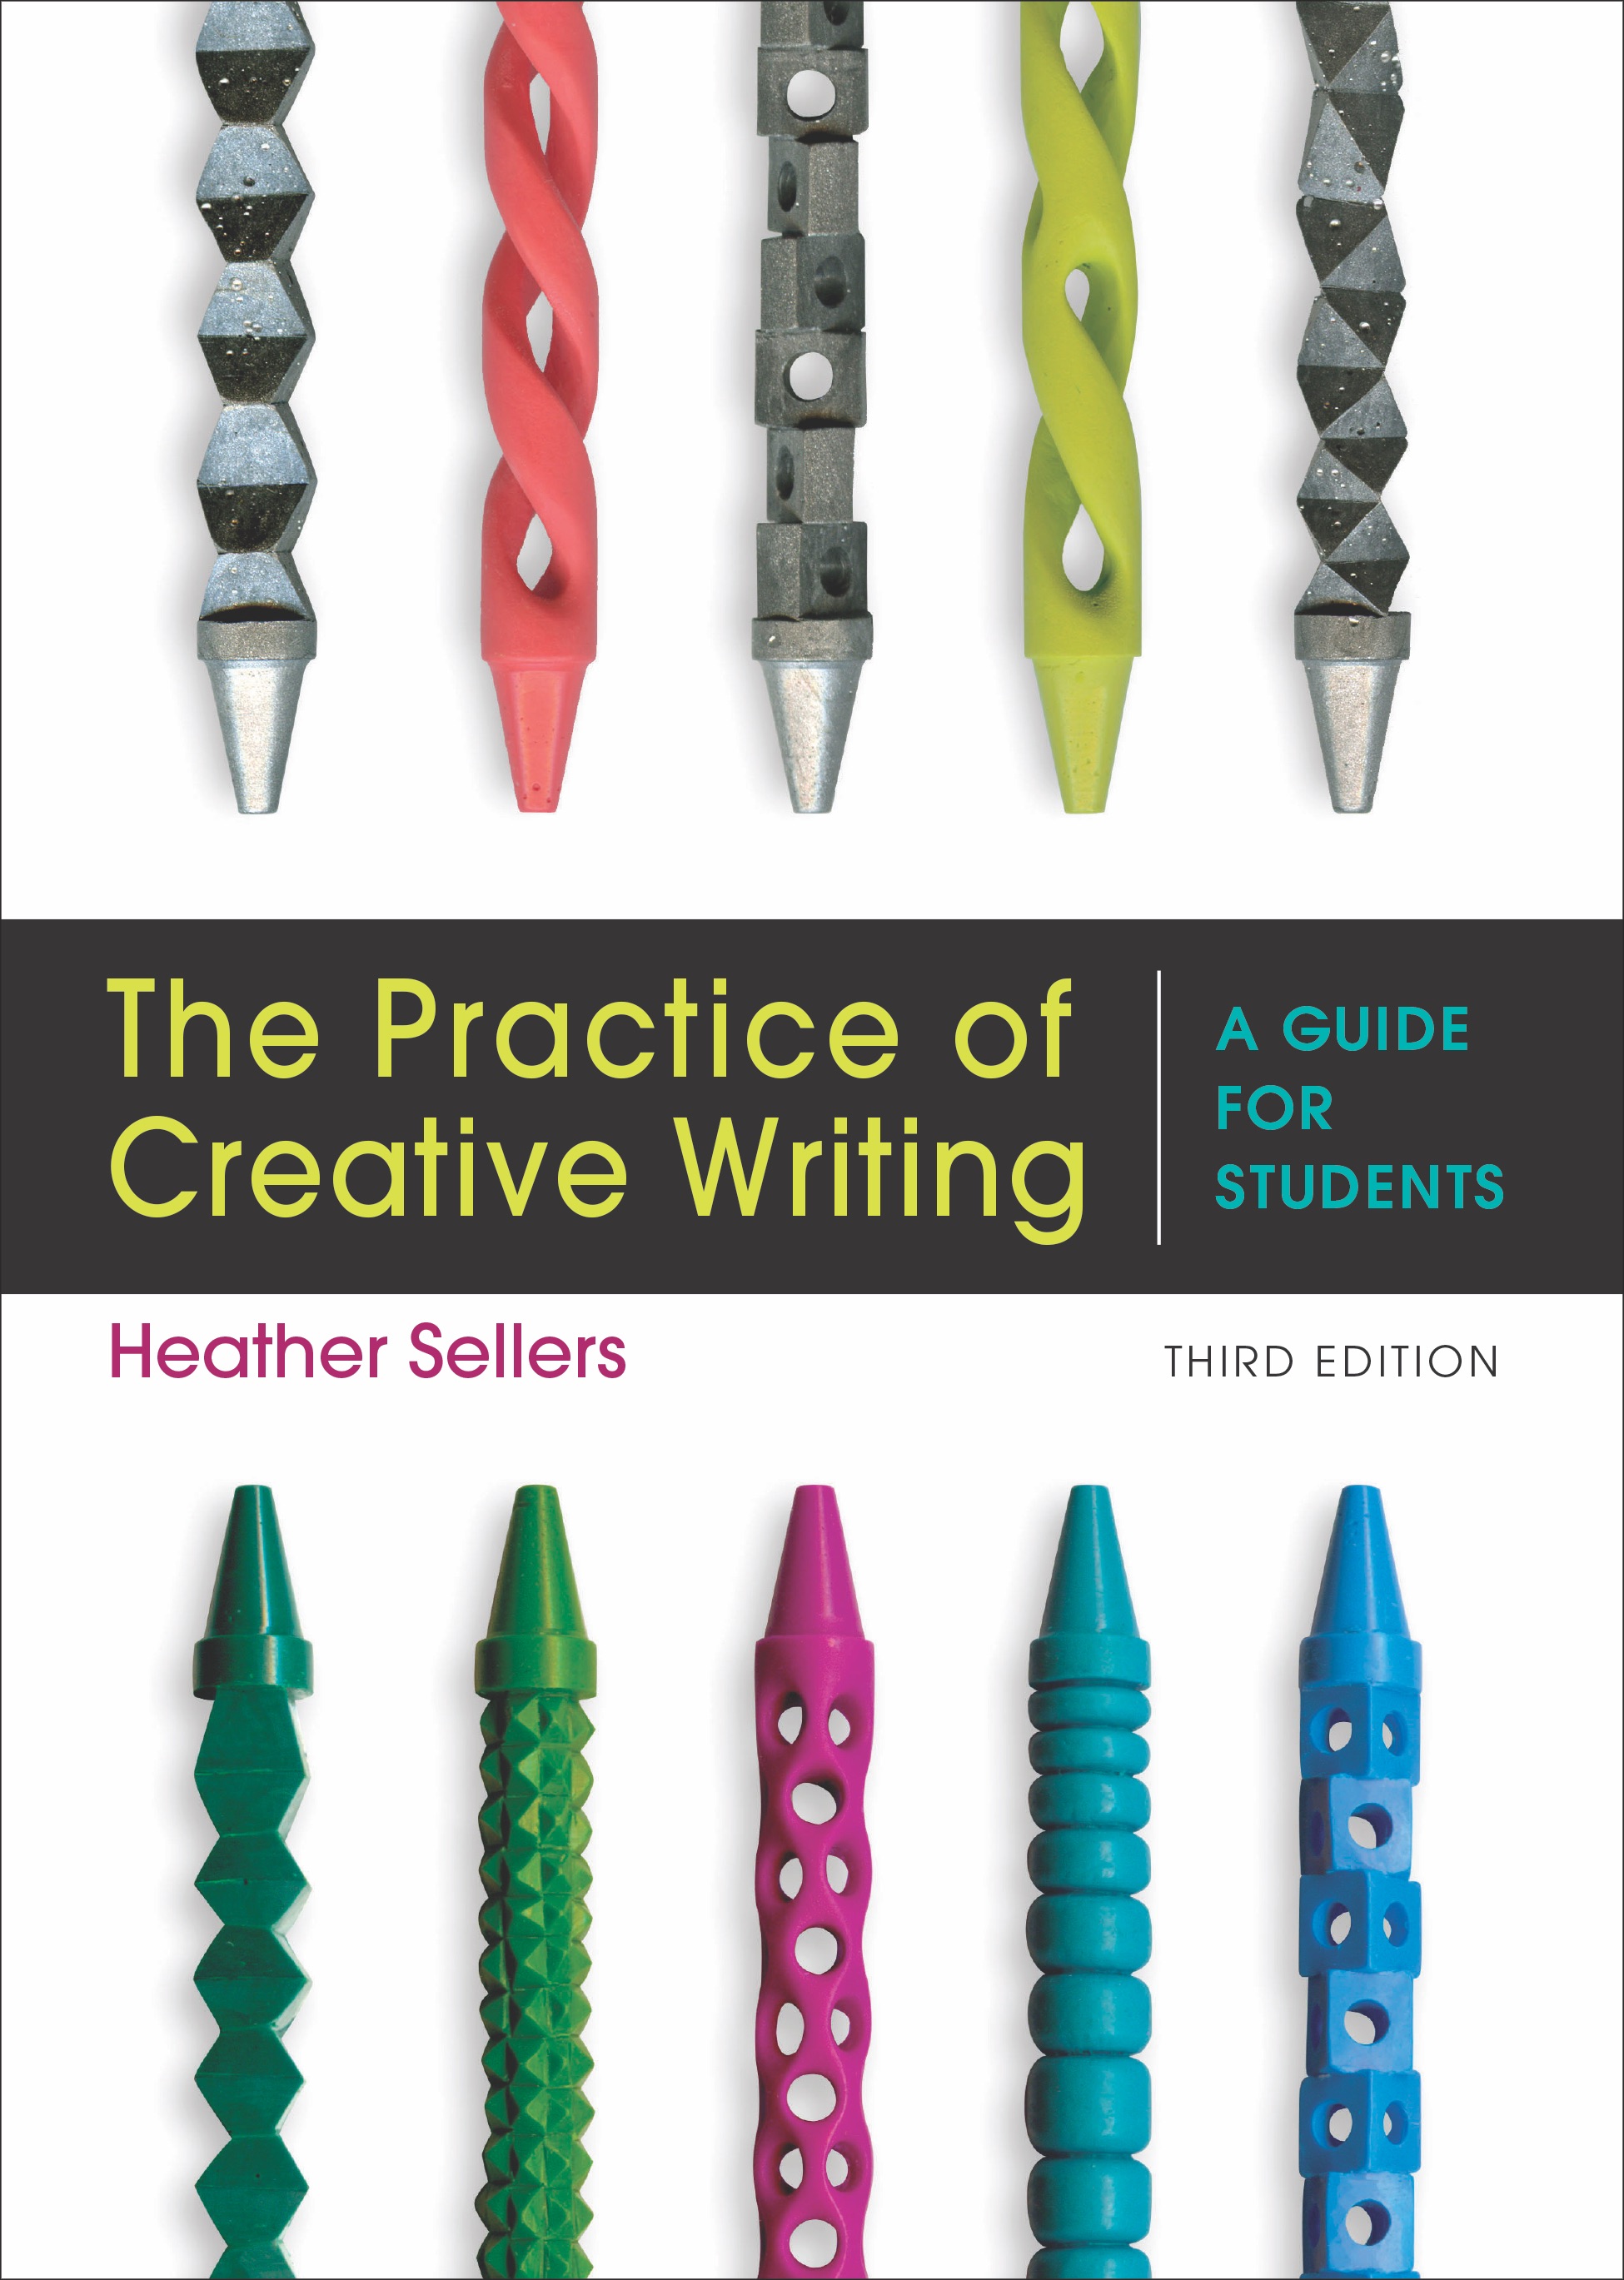 The Practice of Creative Writing, 3rd Edition